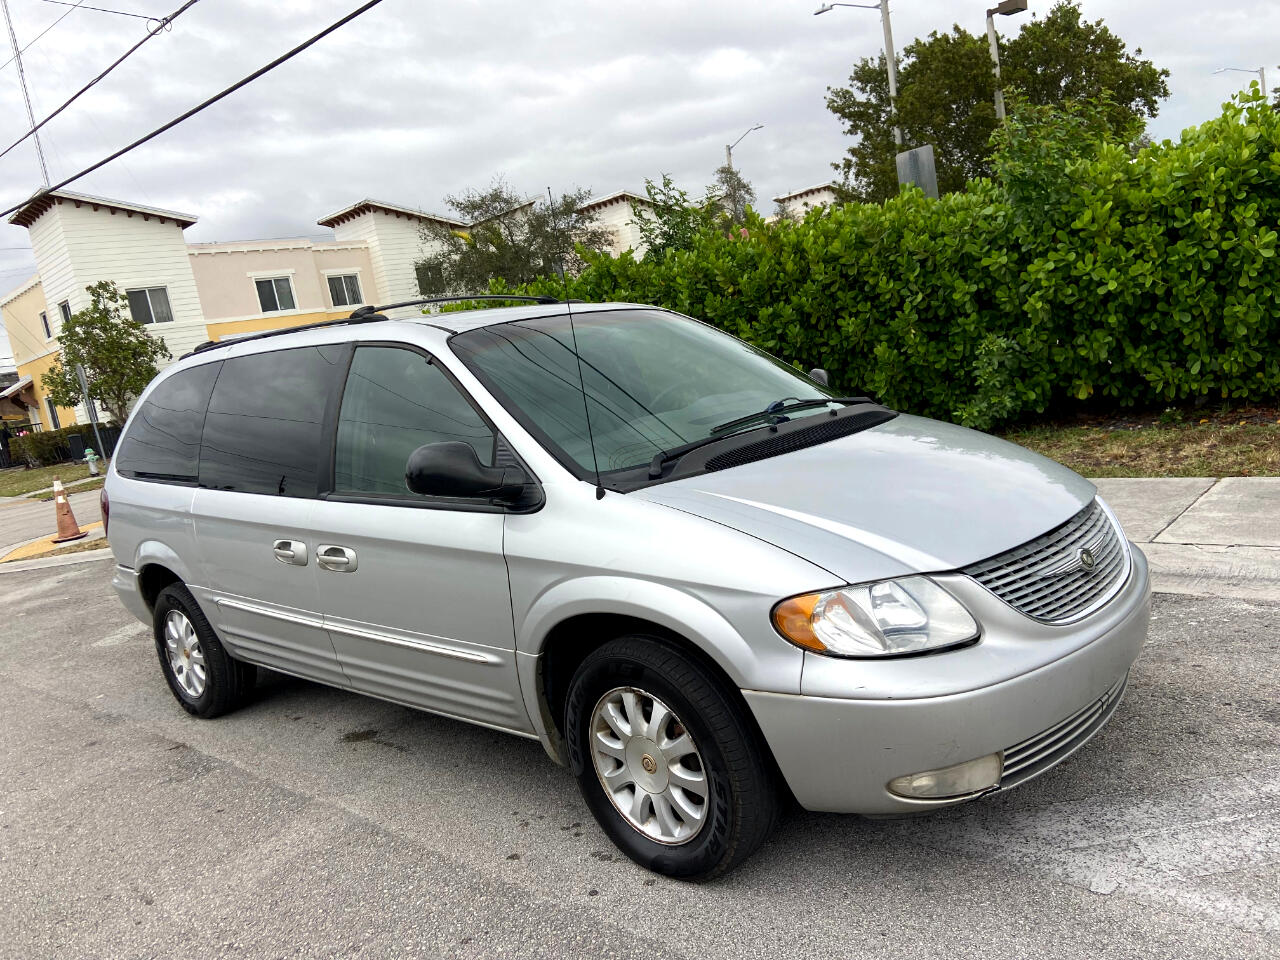 Chrysler Town & Country LXI 2002